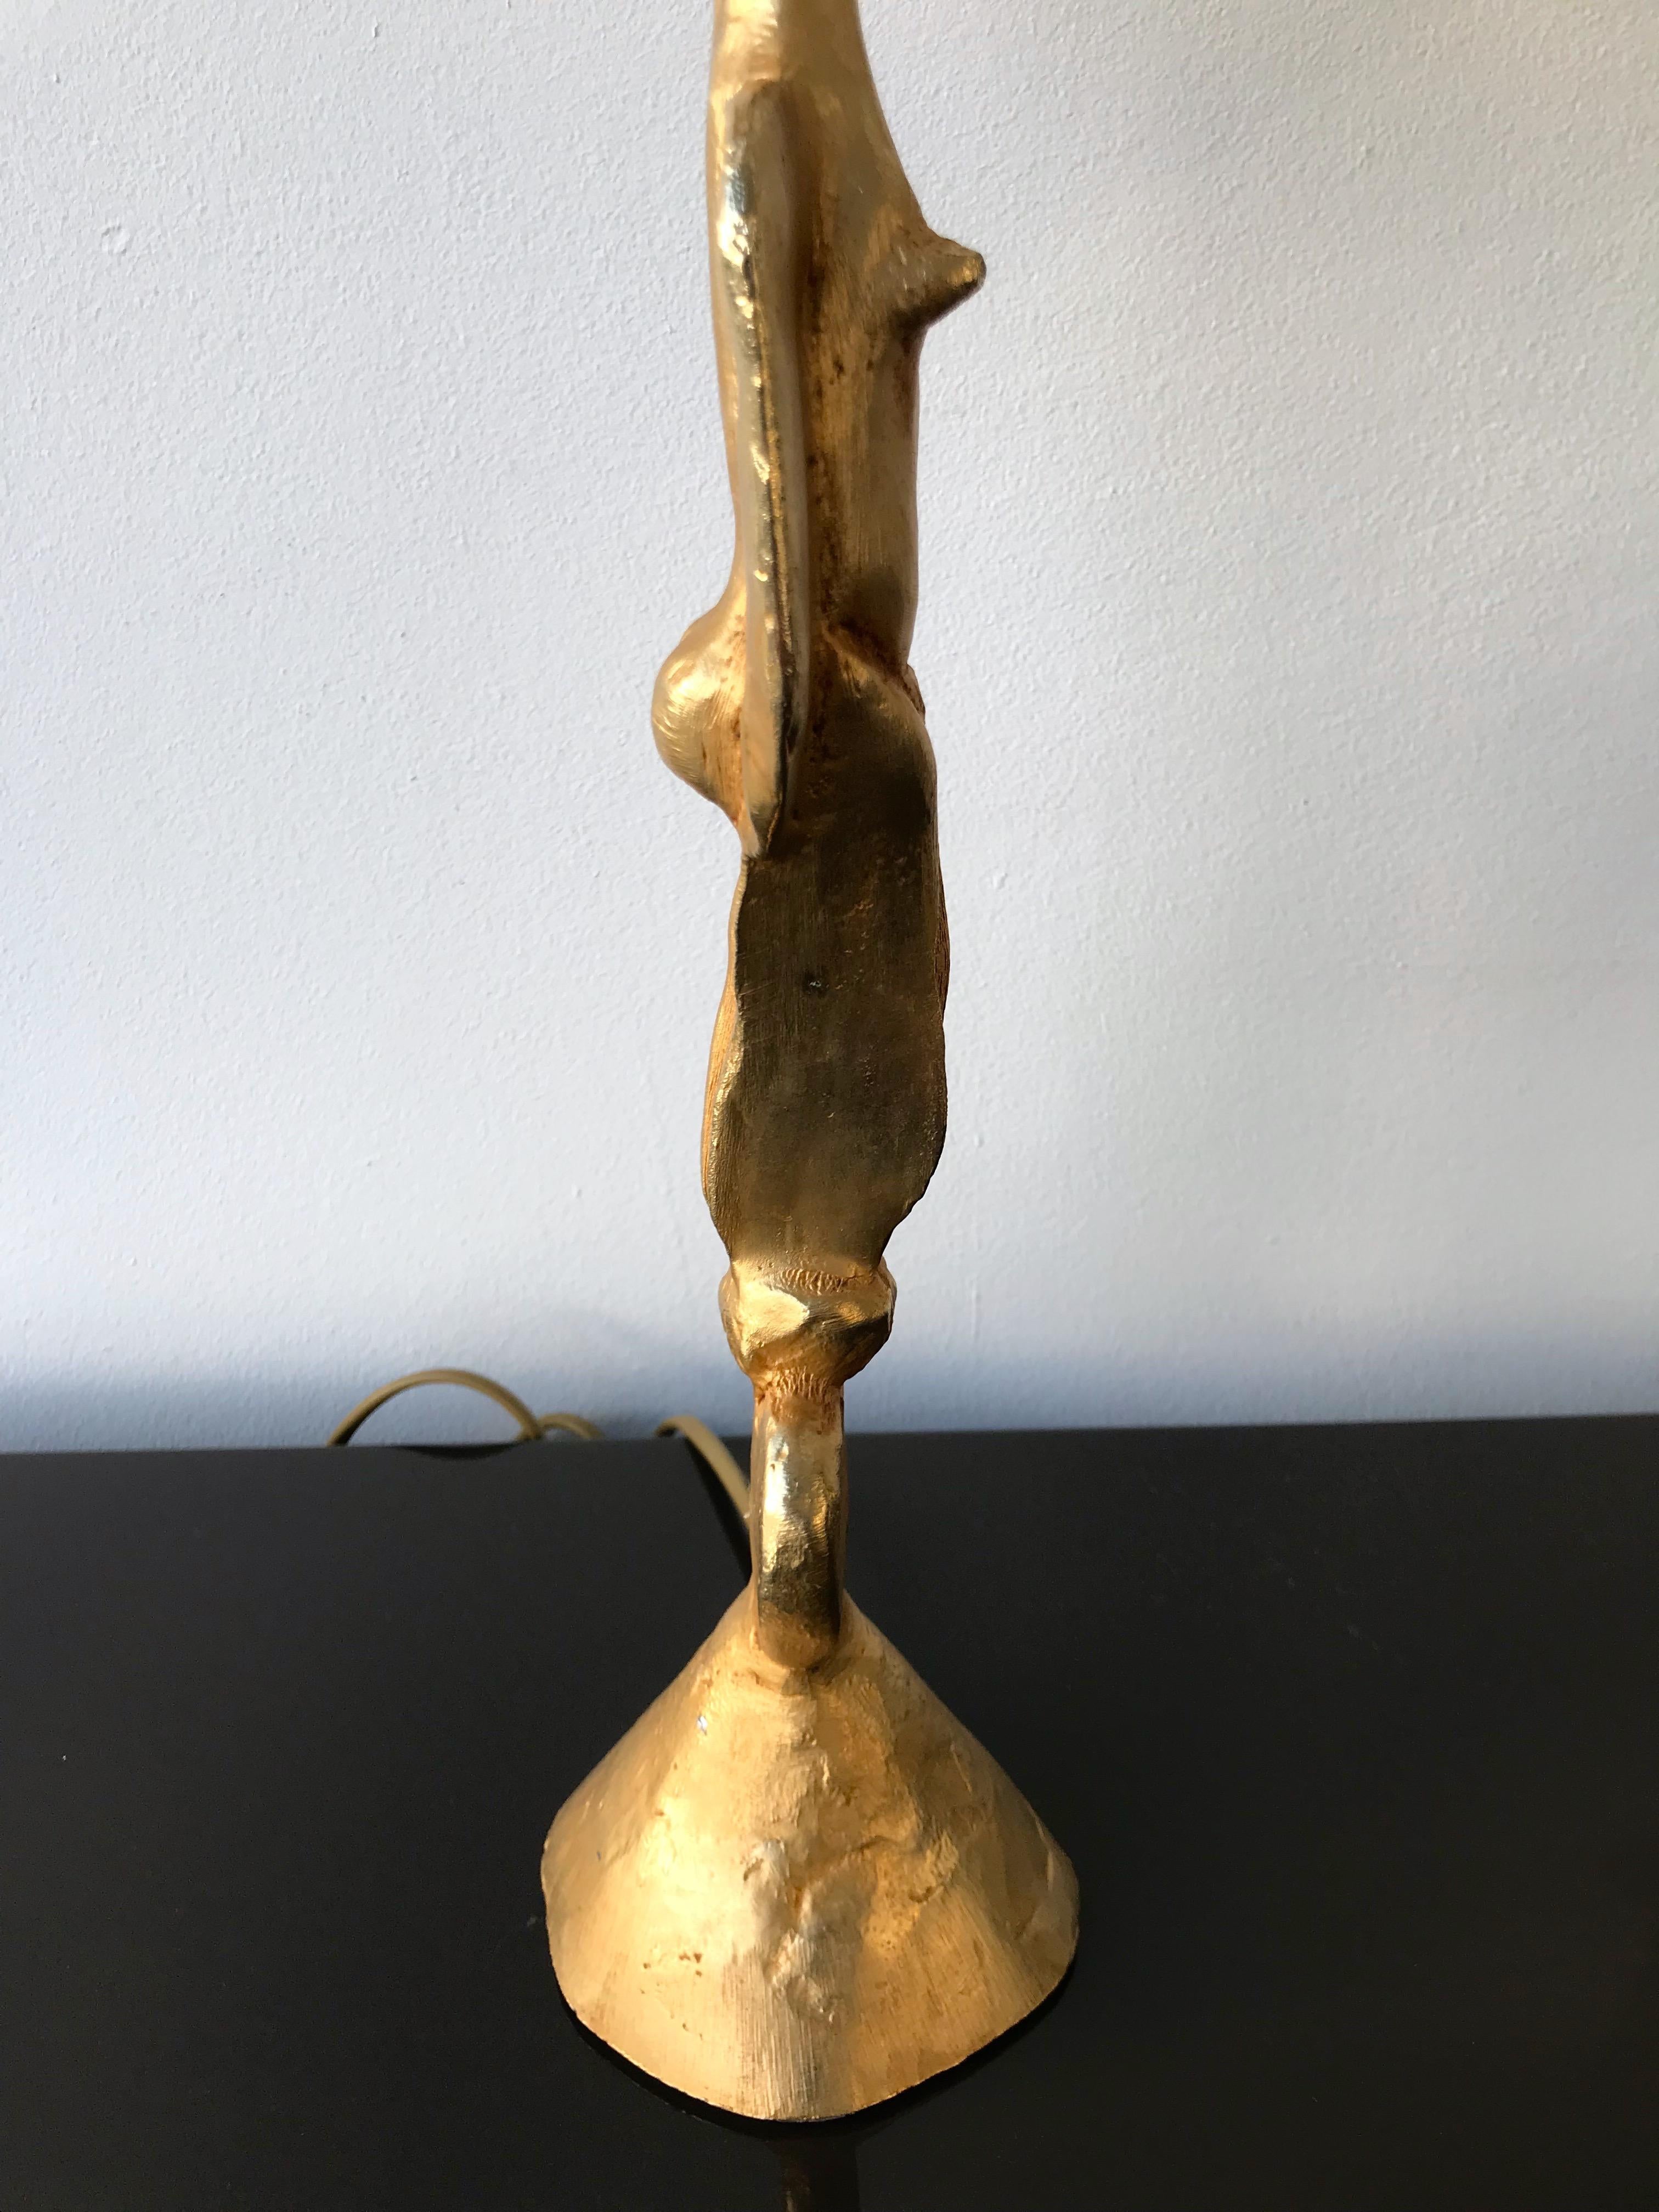 Rare and tallest model of table or bedside lamps by the artist Pierre Casenove for the foundry Fondica in Gisors France. Gilt bronze metal. Rare model to the goddess and the bird. No more production today. Height top of sculpture 51cms. Note :